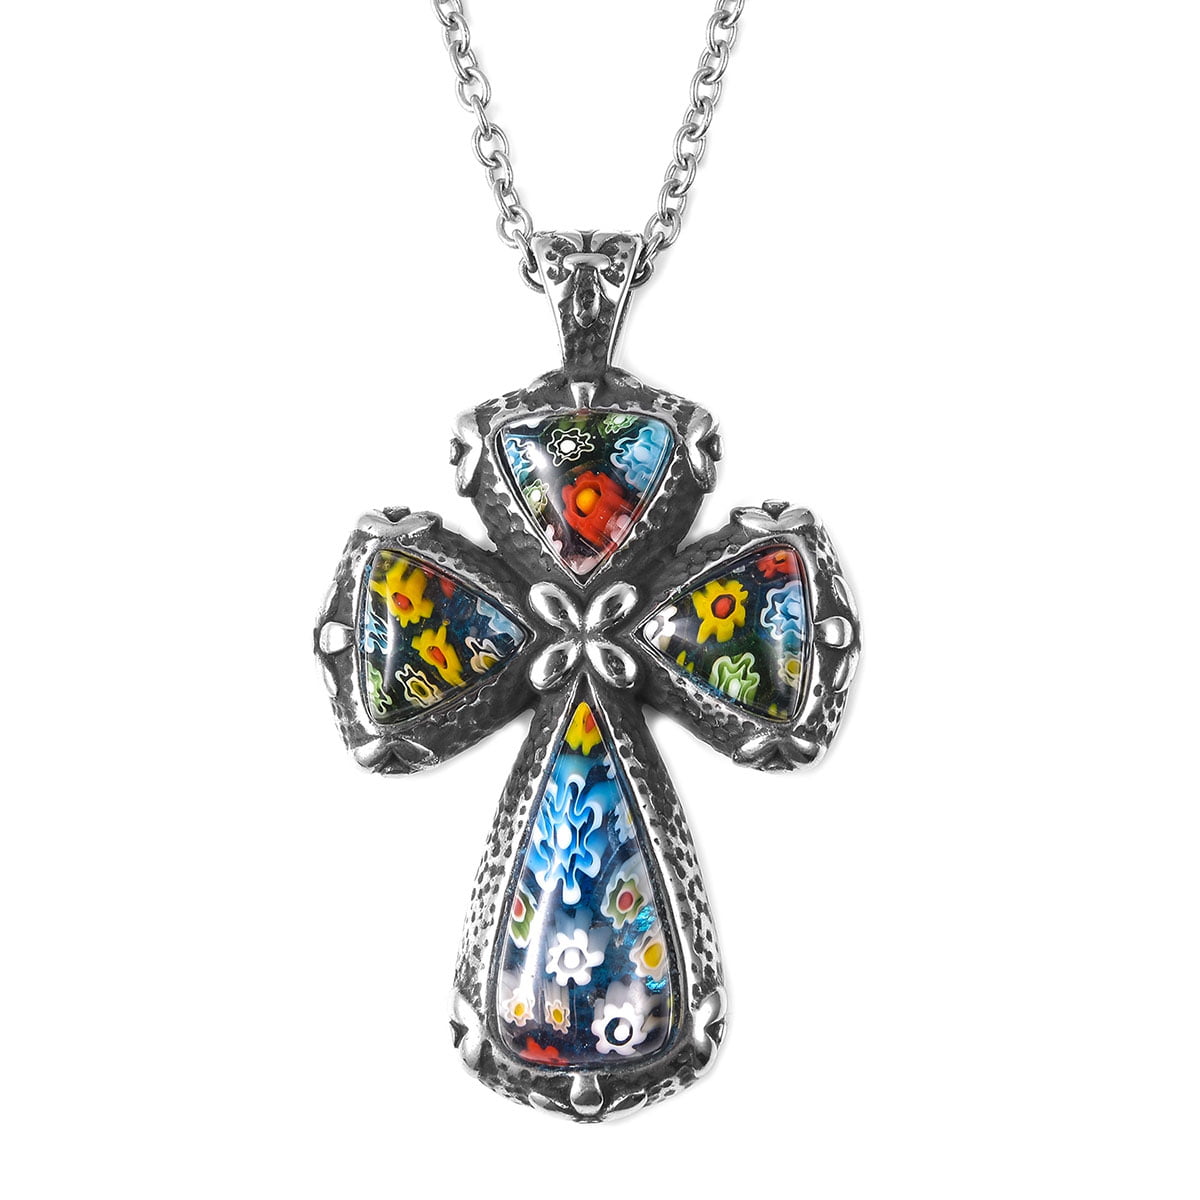 Shop LC - Shop LC Delivering Joy Stainless Steel Glass Cross Pendant Necklace for Women Graduation Gifts for Her Fashion Jewelry Size 20&quot;